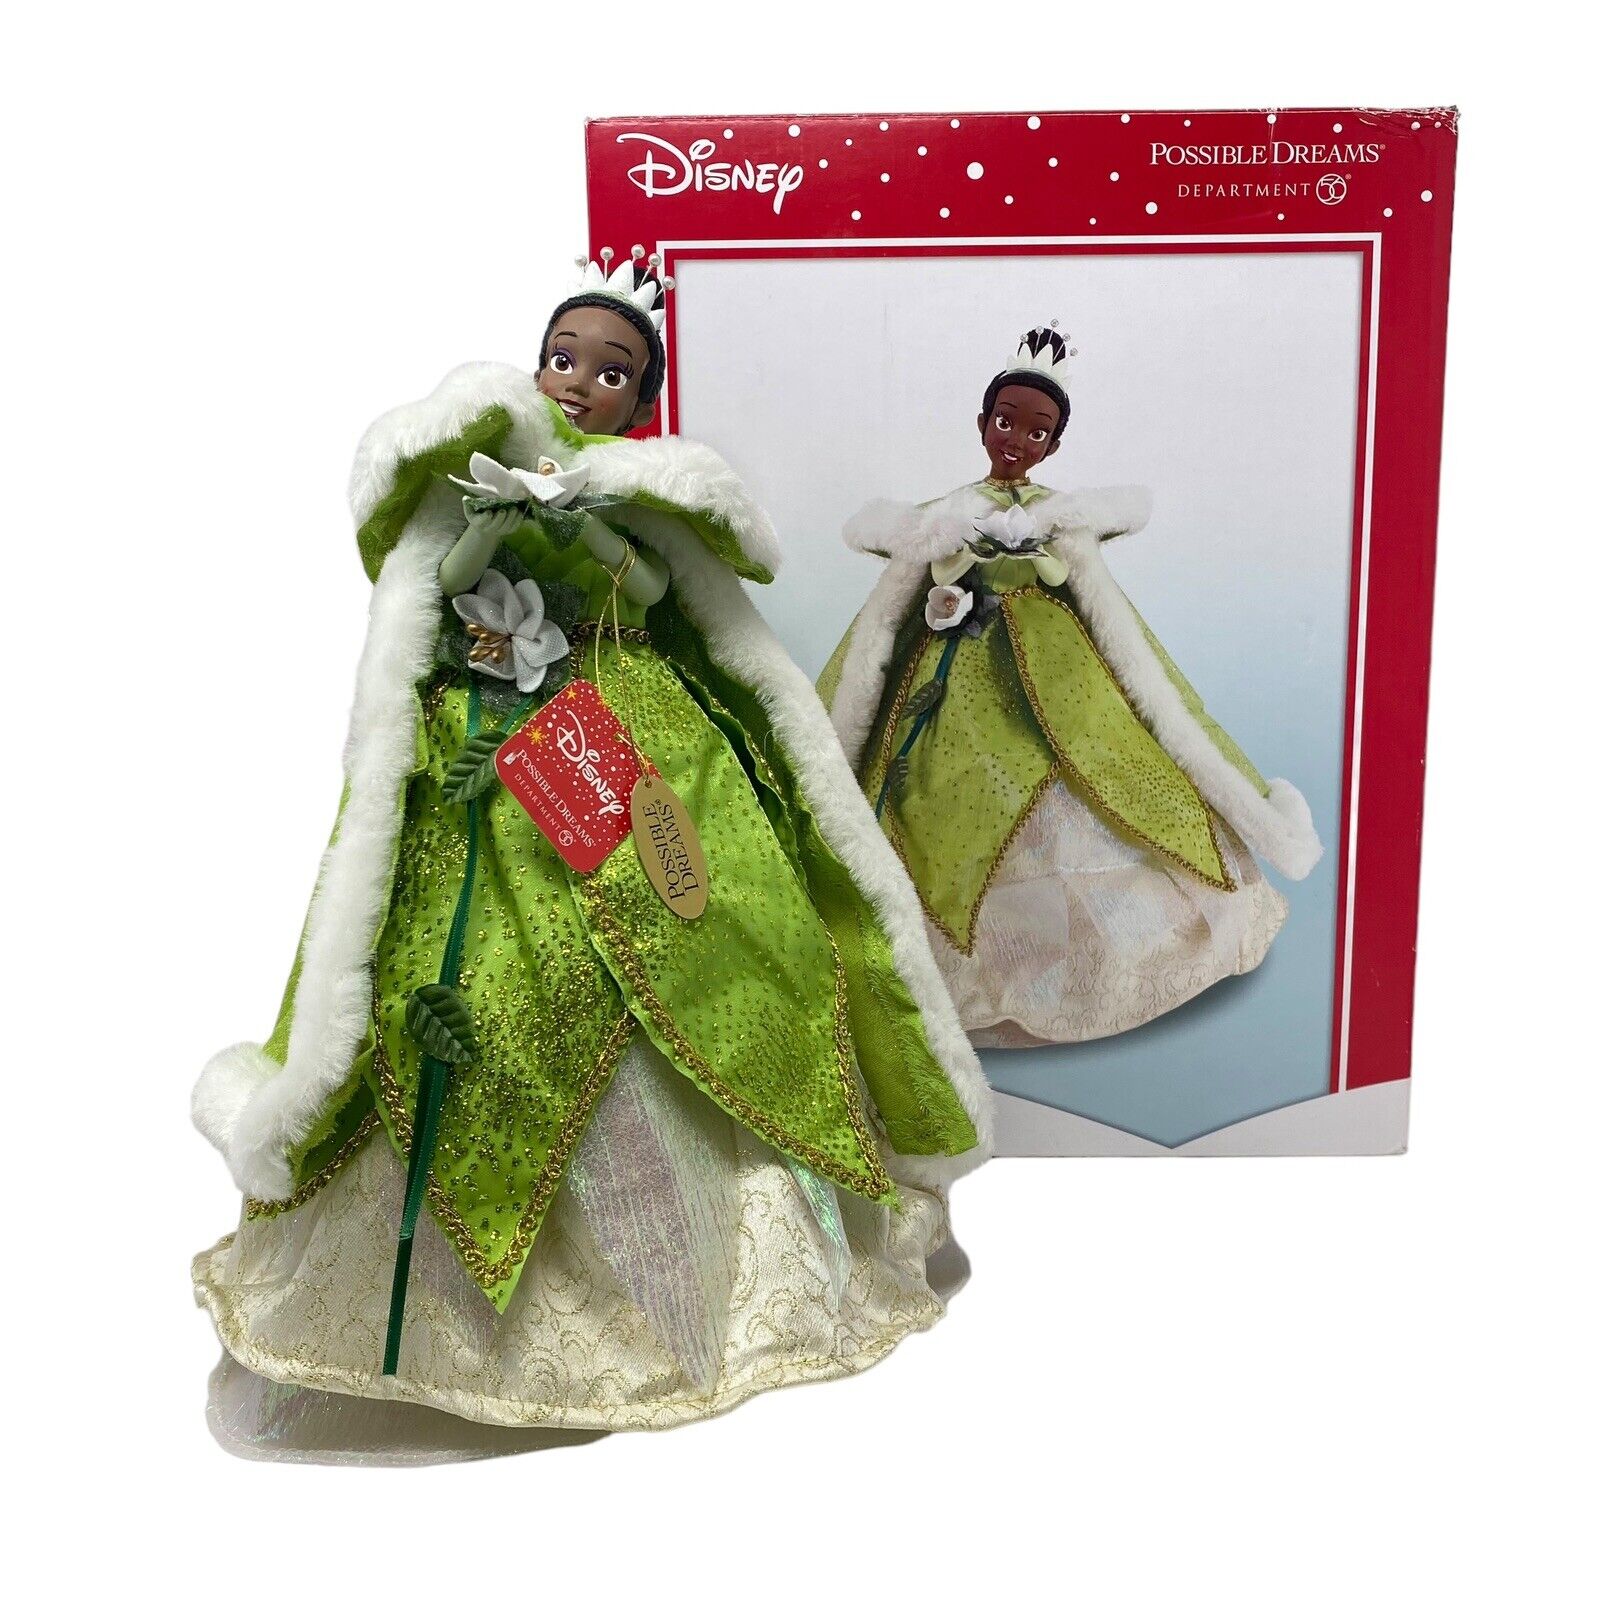 Retired DEPARTMENT 56 DISNEY  Possible Dreams TIANA Prinecess TREE TOPPER new